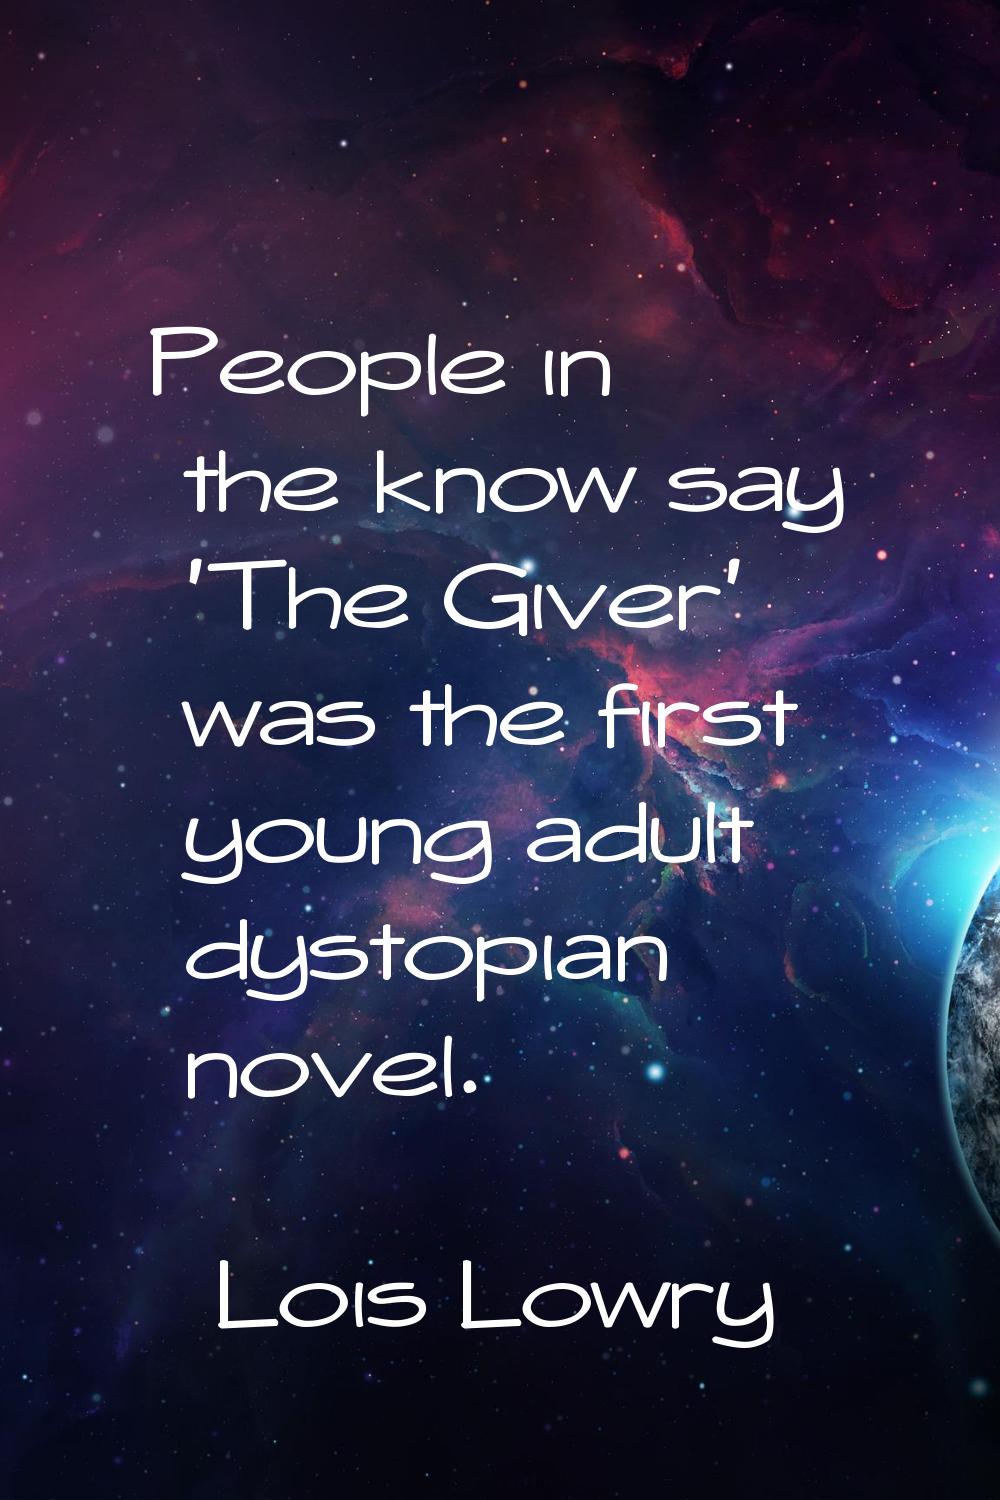 People in the know say 'The Giver' was the first young adult dystopian novel.